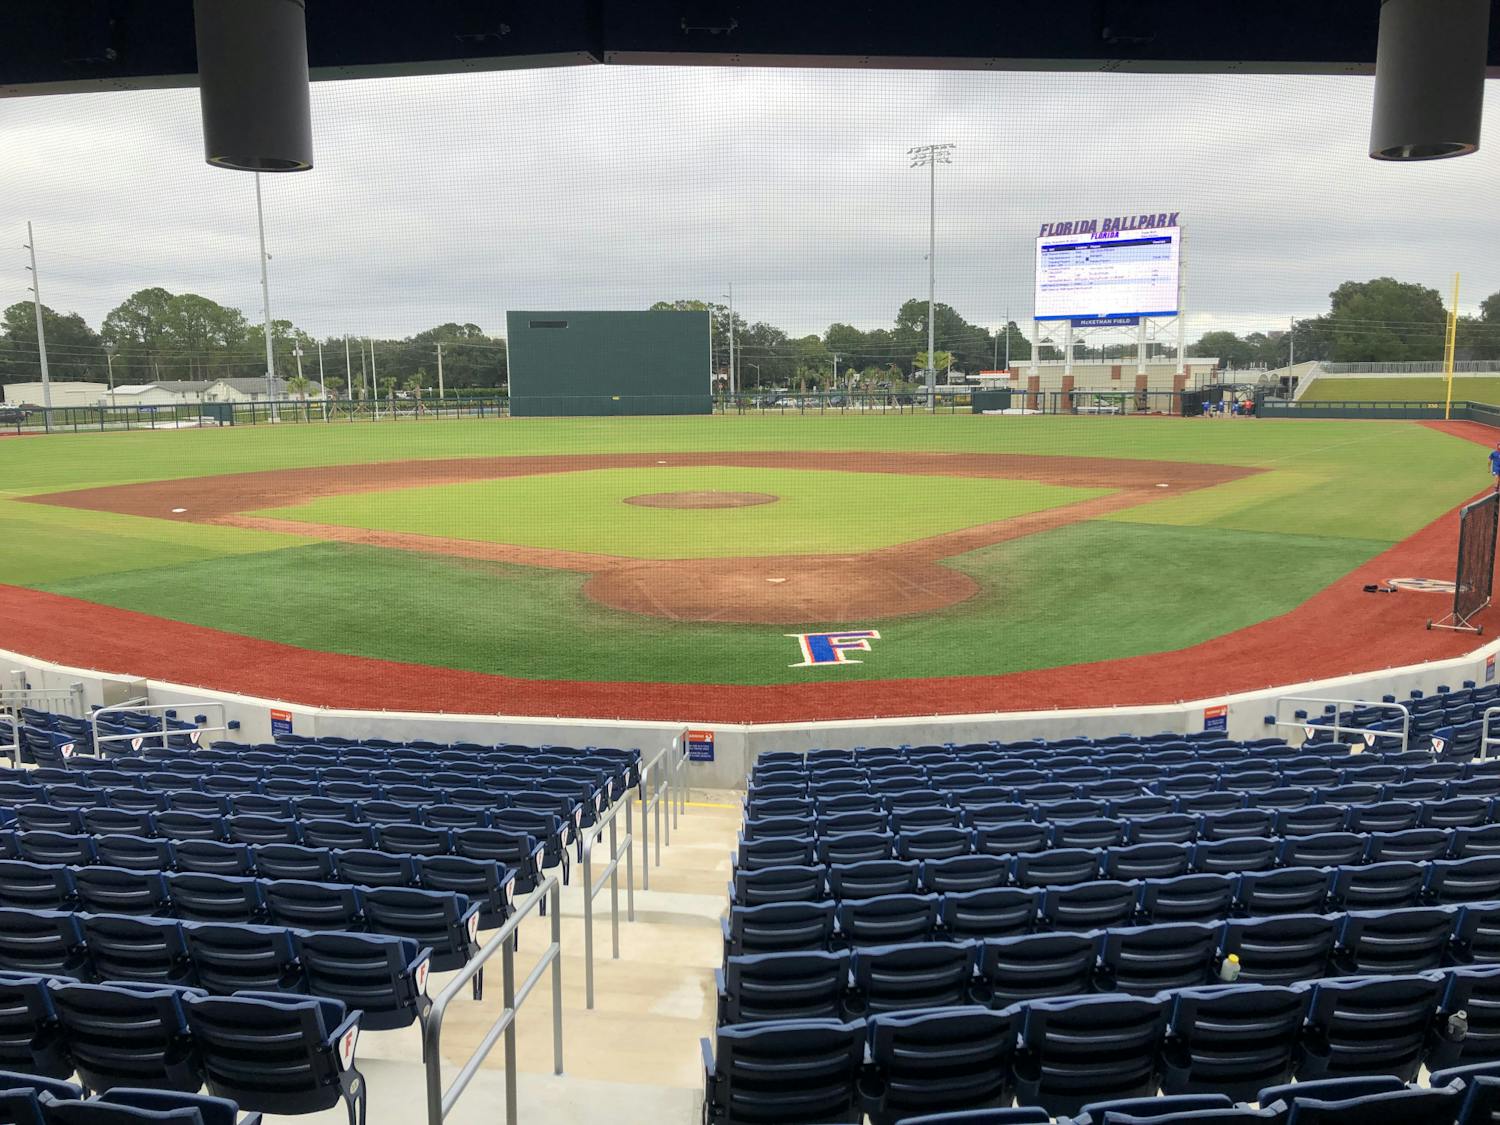 Clouds gather over Alfred A. McKethan Field at Florida Ballpark on Nov. 13, 2020 before one of the Gators’ fall scrimmages.